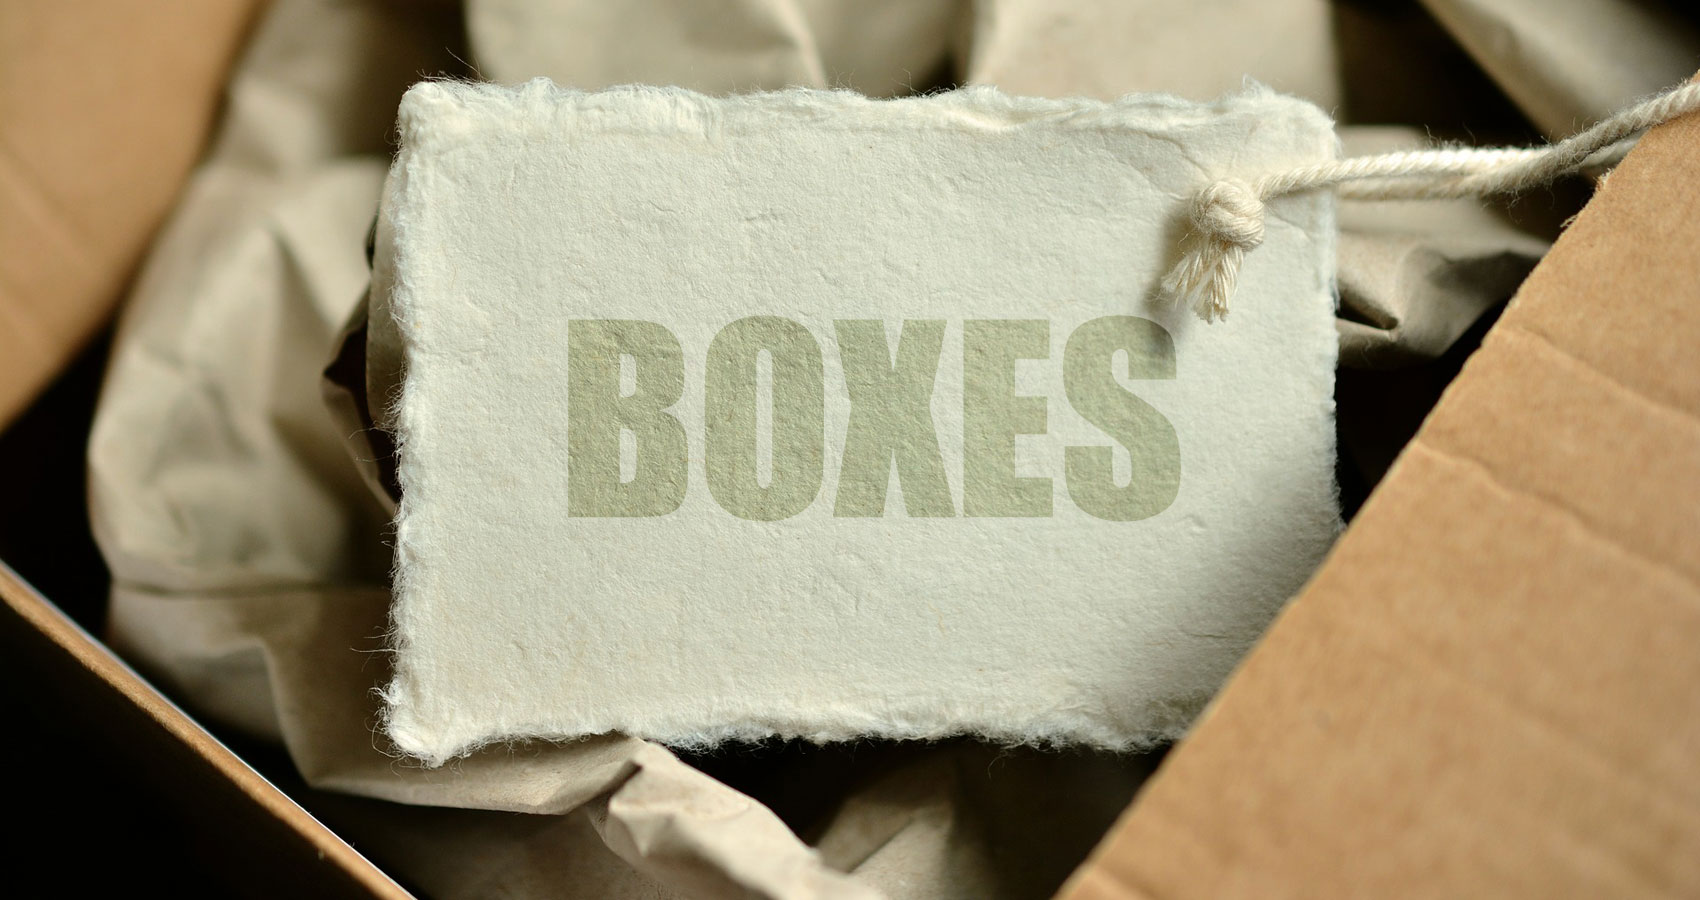 Boxes, poetry written by JOHN BAVERSTOCK at Spillwords.com